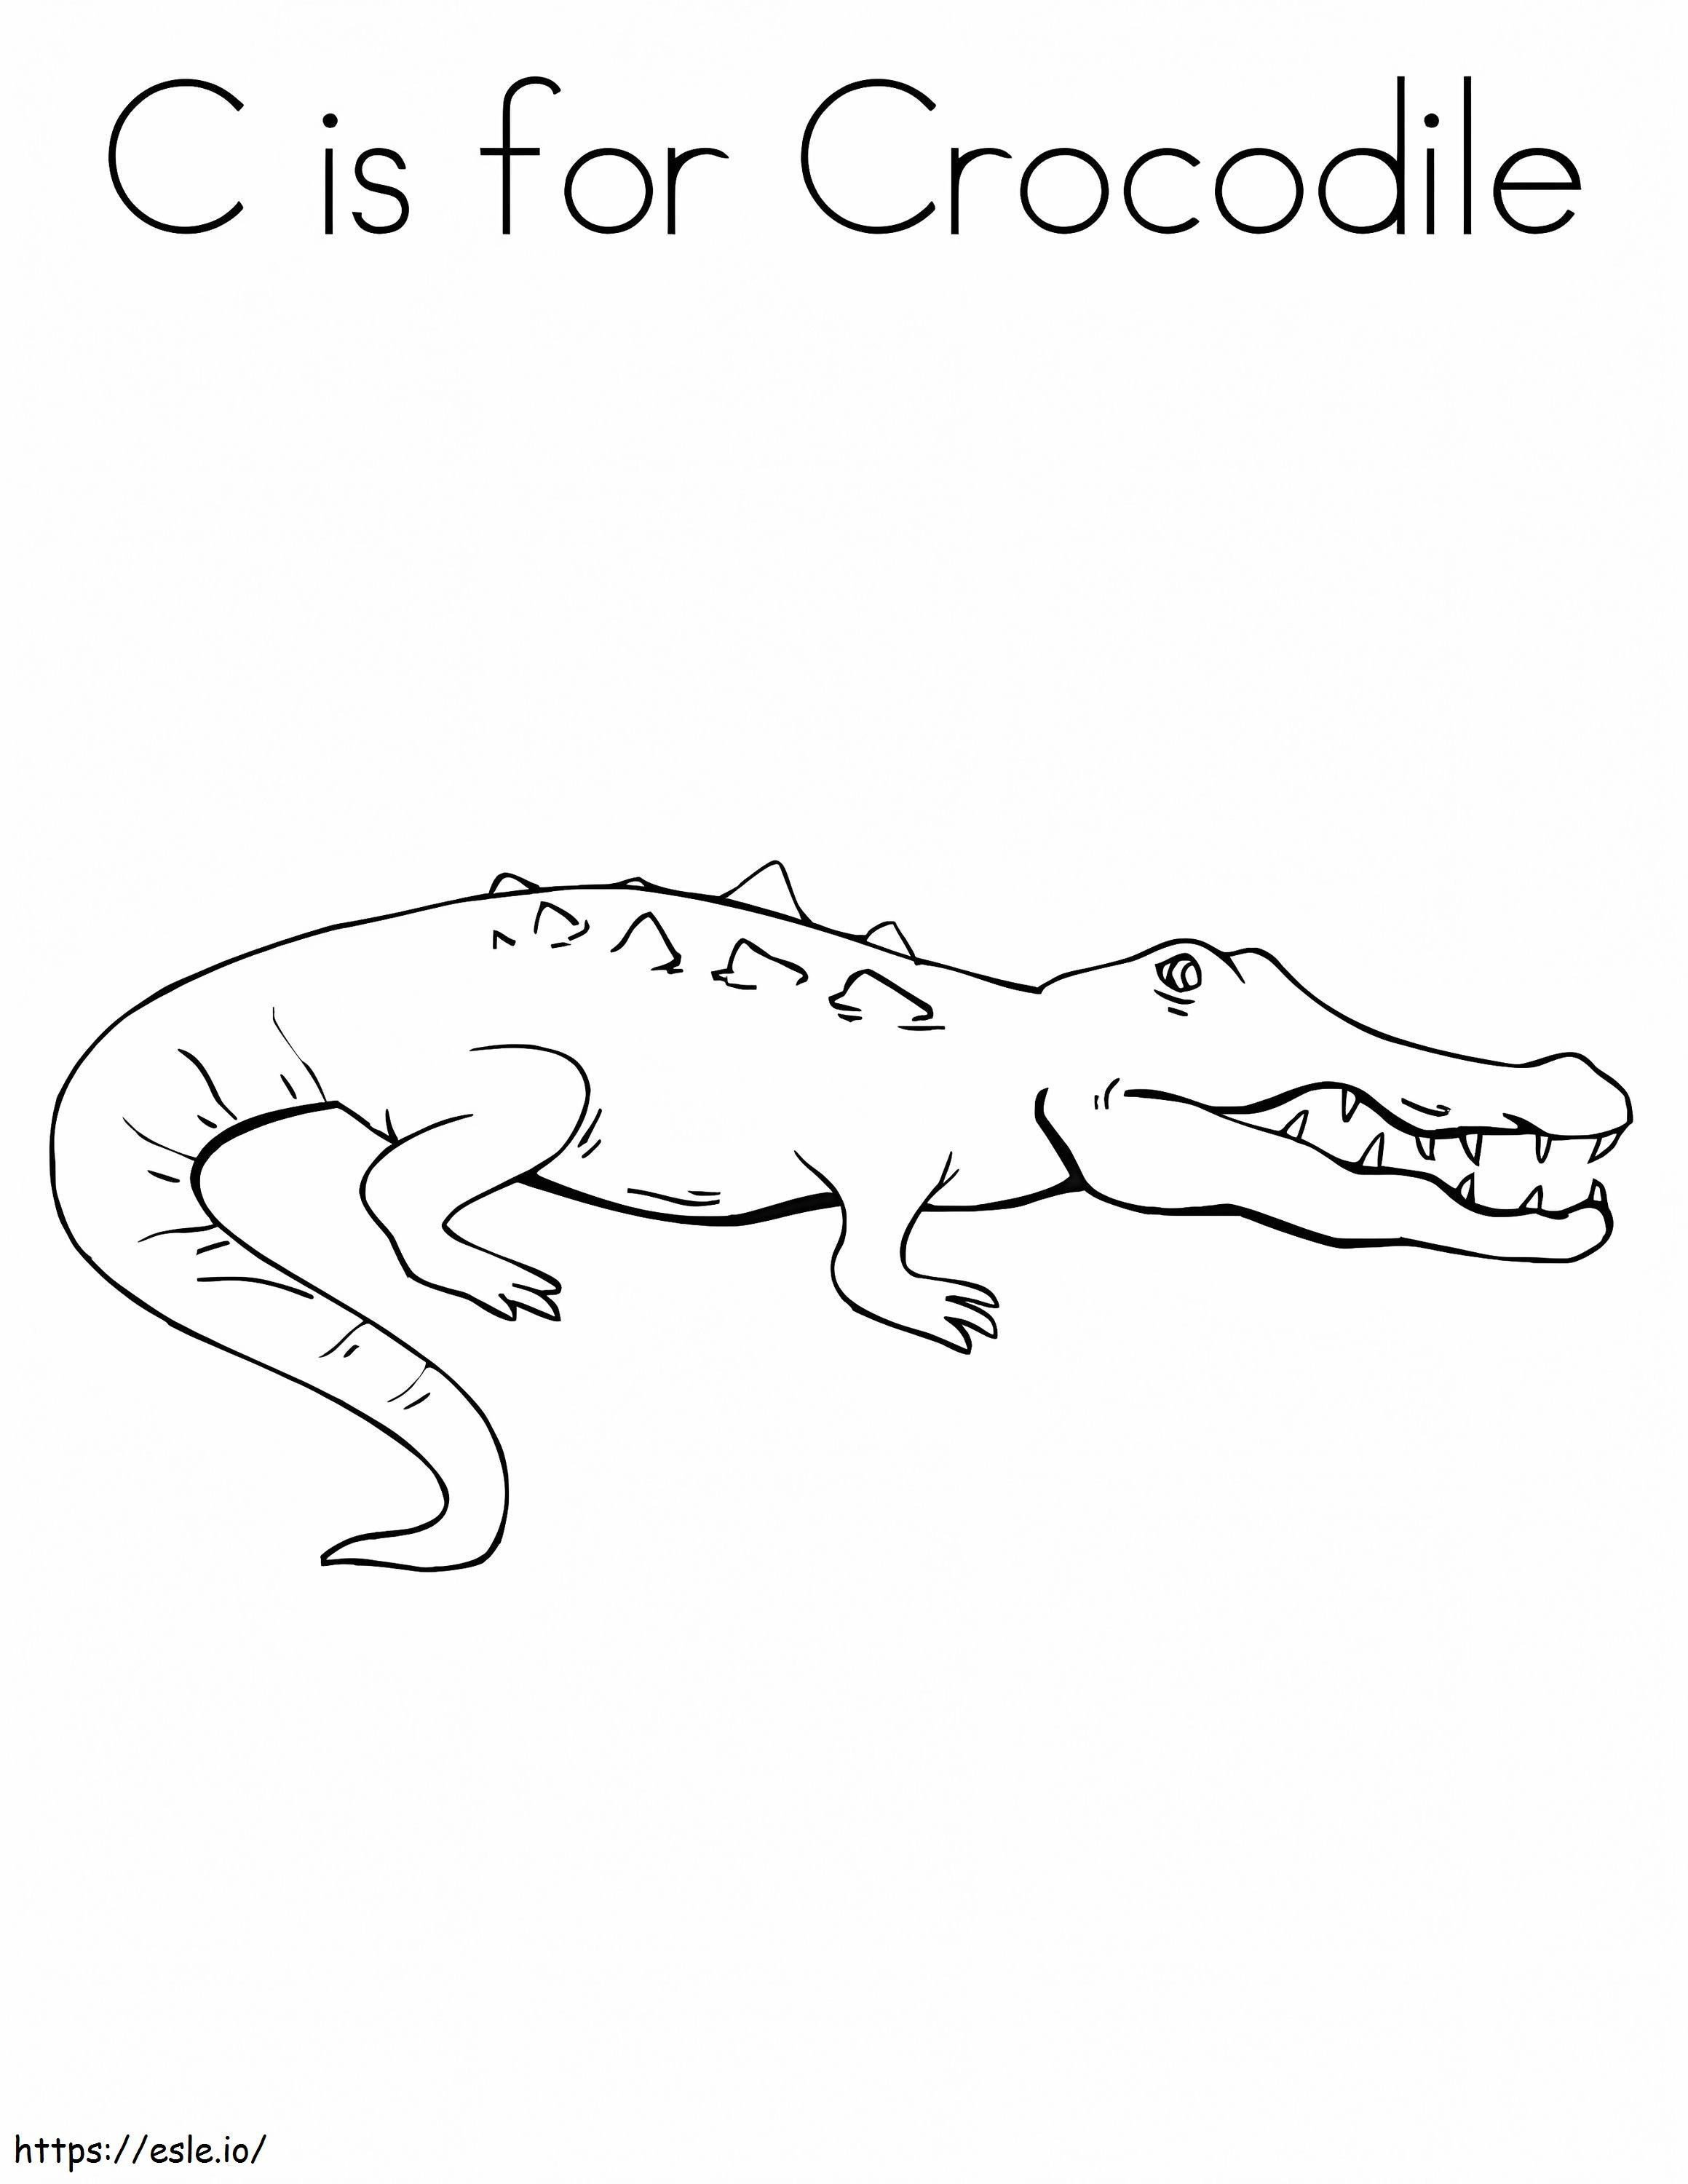 C Is For Crocodile coloring page